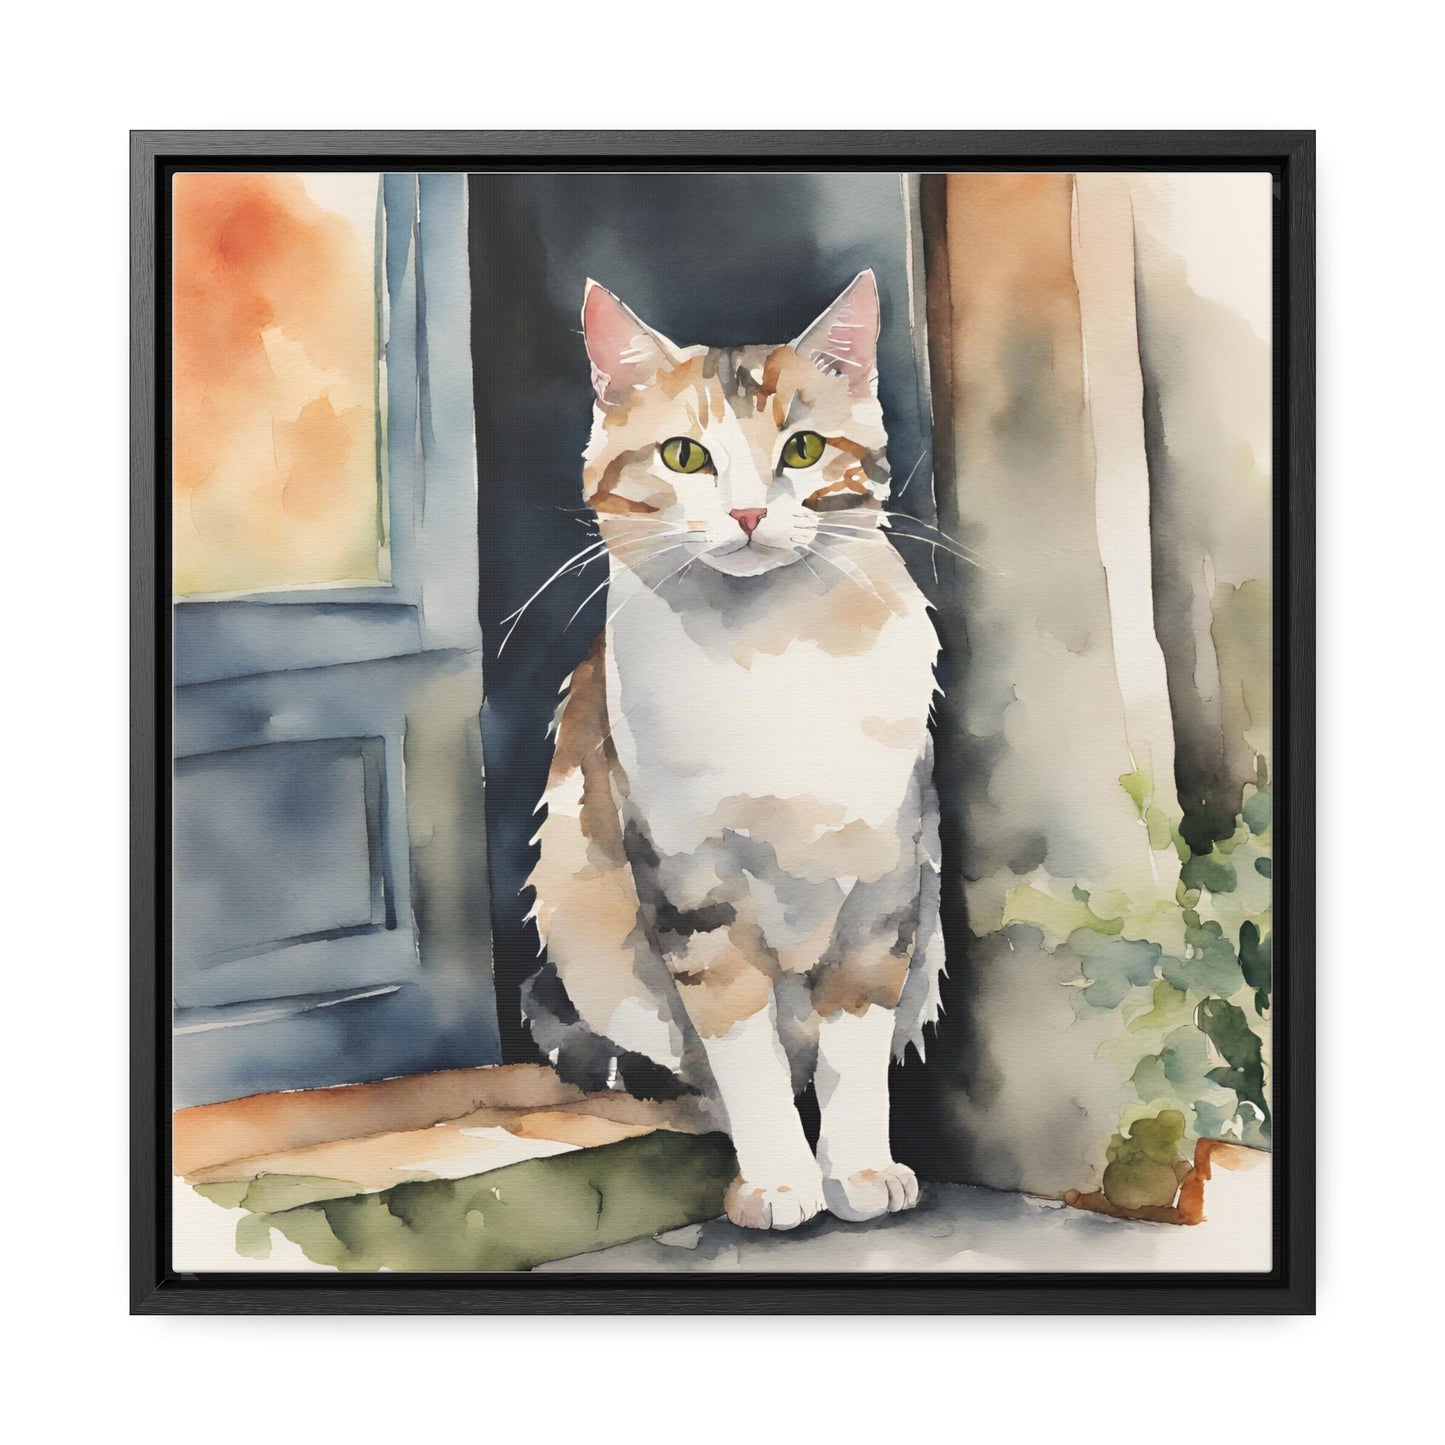 Watercolor Cat on Stoop Gallery Canvas Wraps, Square Frame